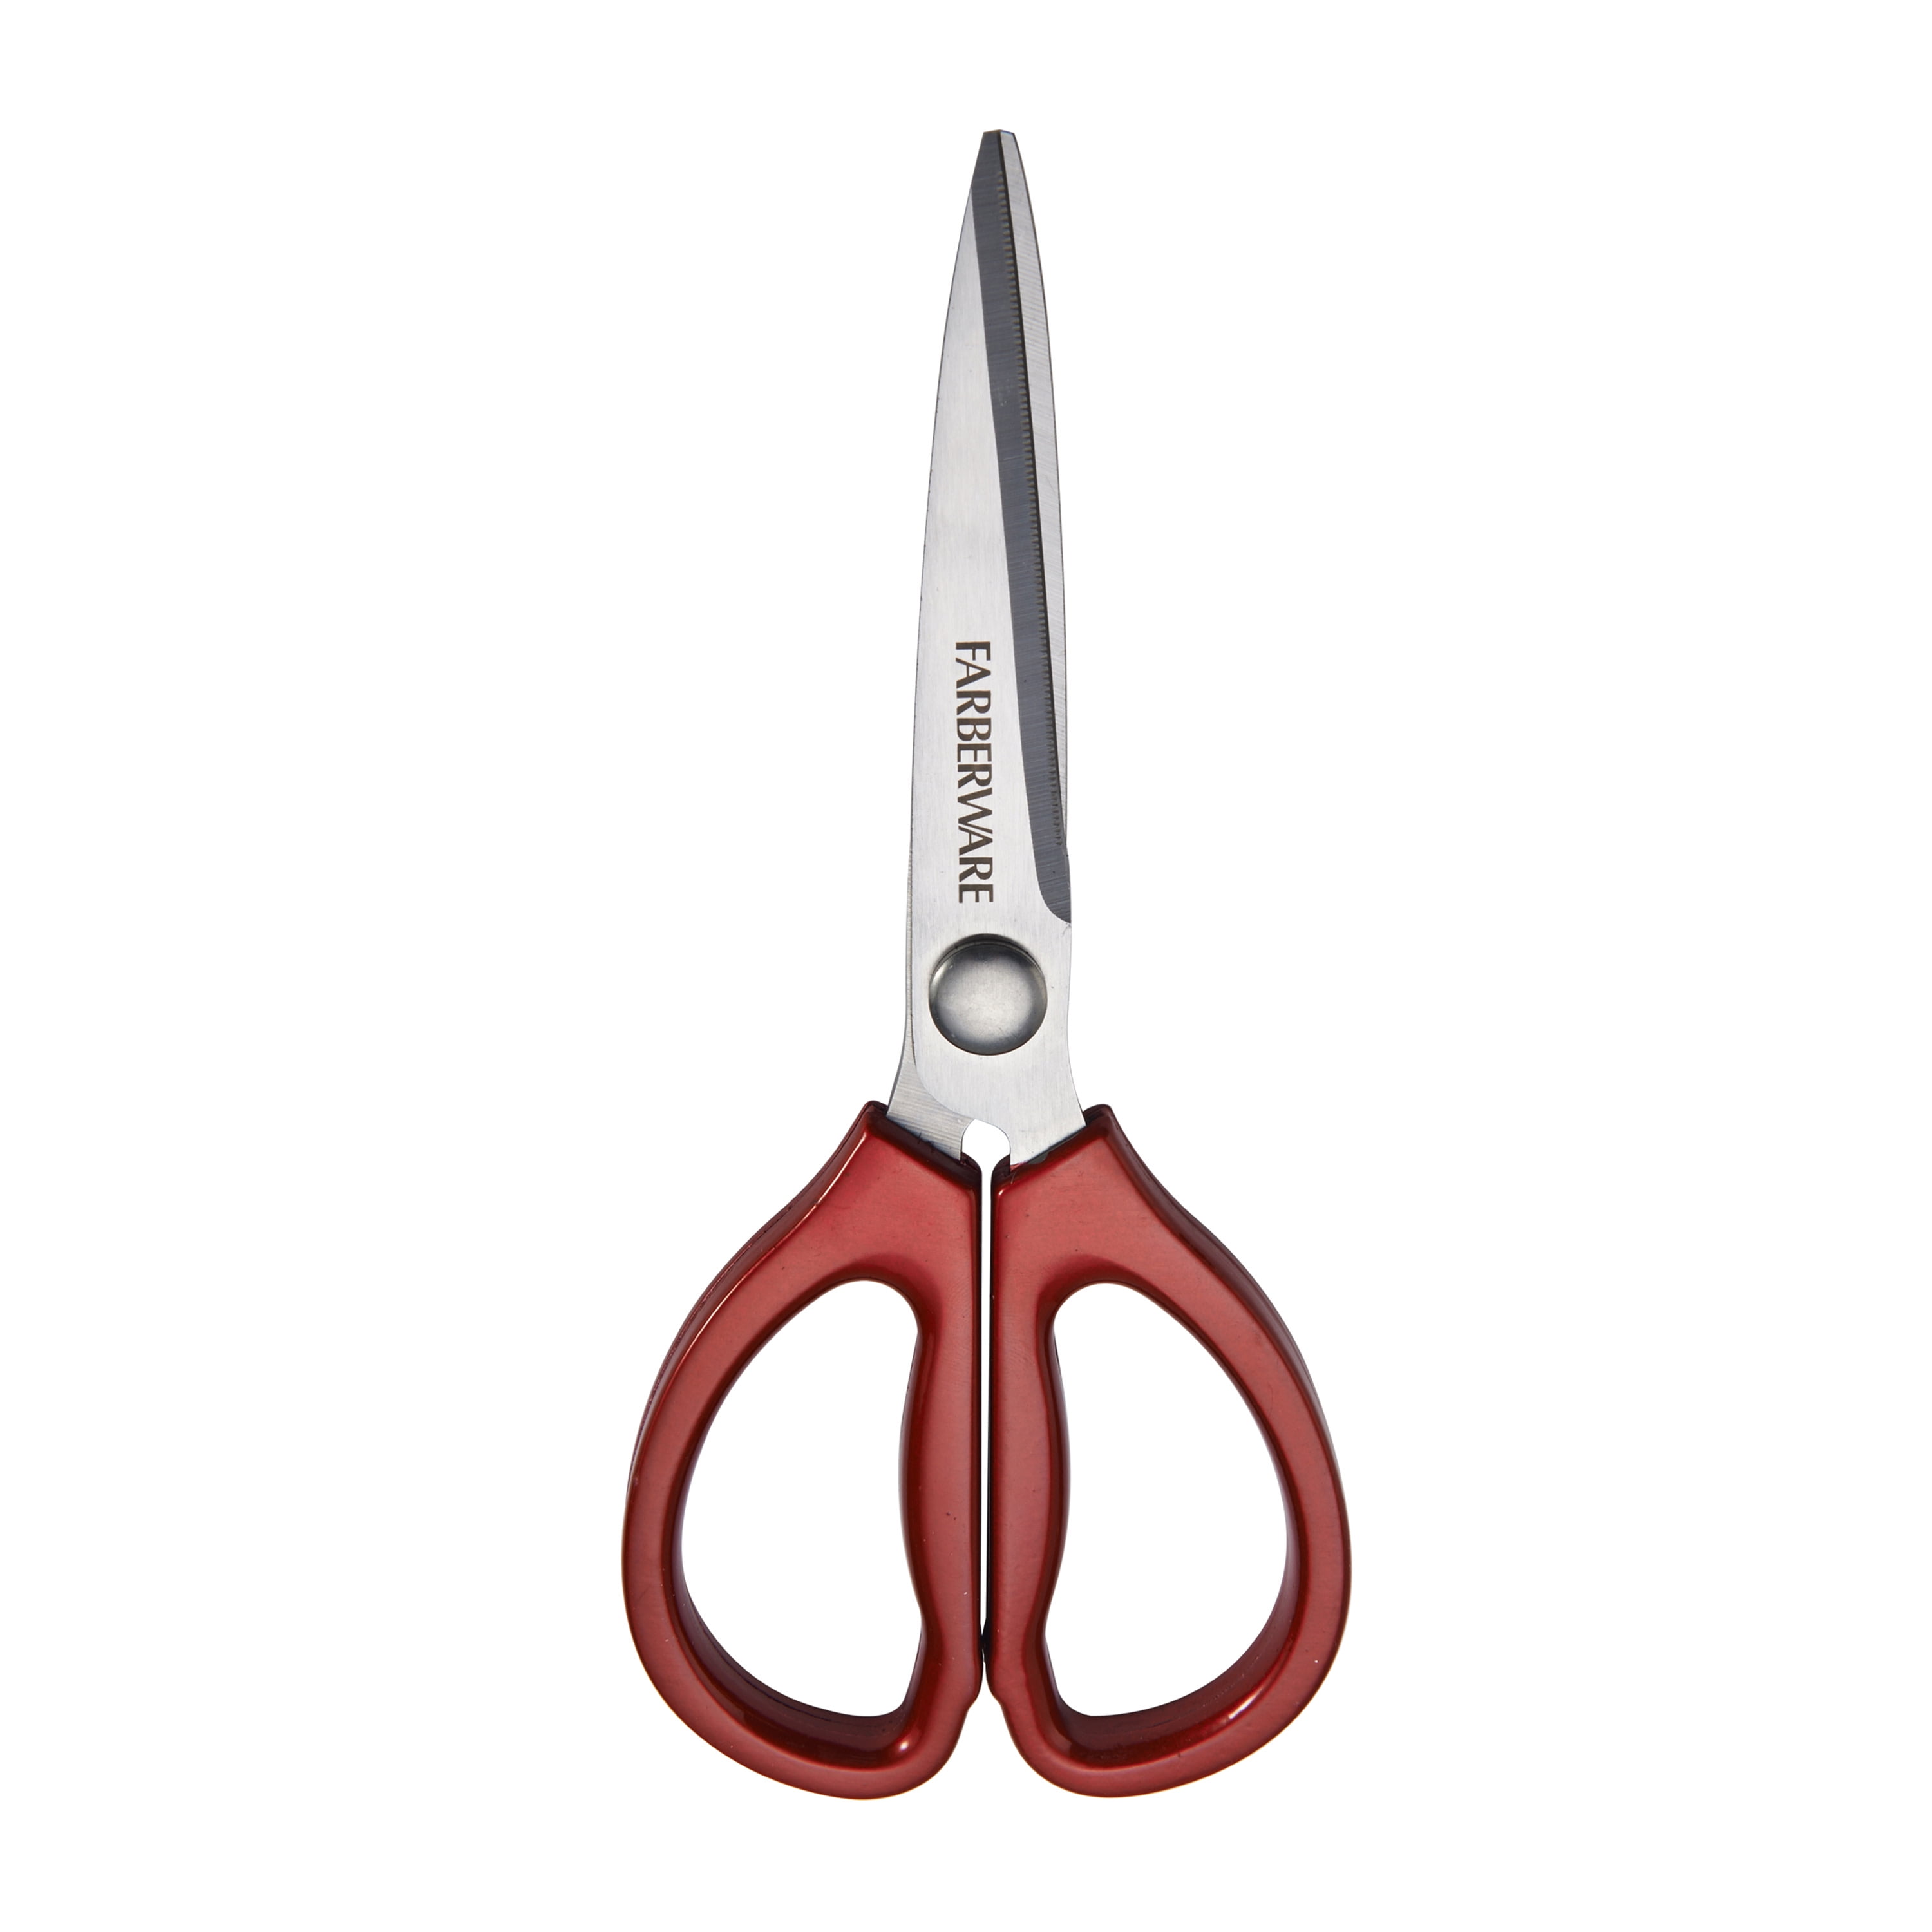 Farberware Classic 2 Piece Stainless Steel Kitchen Shear Scissor Set with  Metallic Stainless Steel and Red Handles